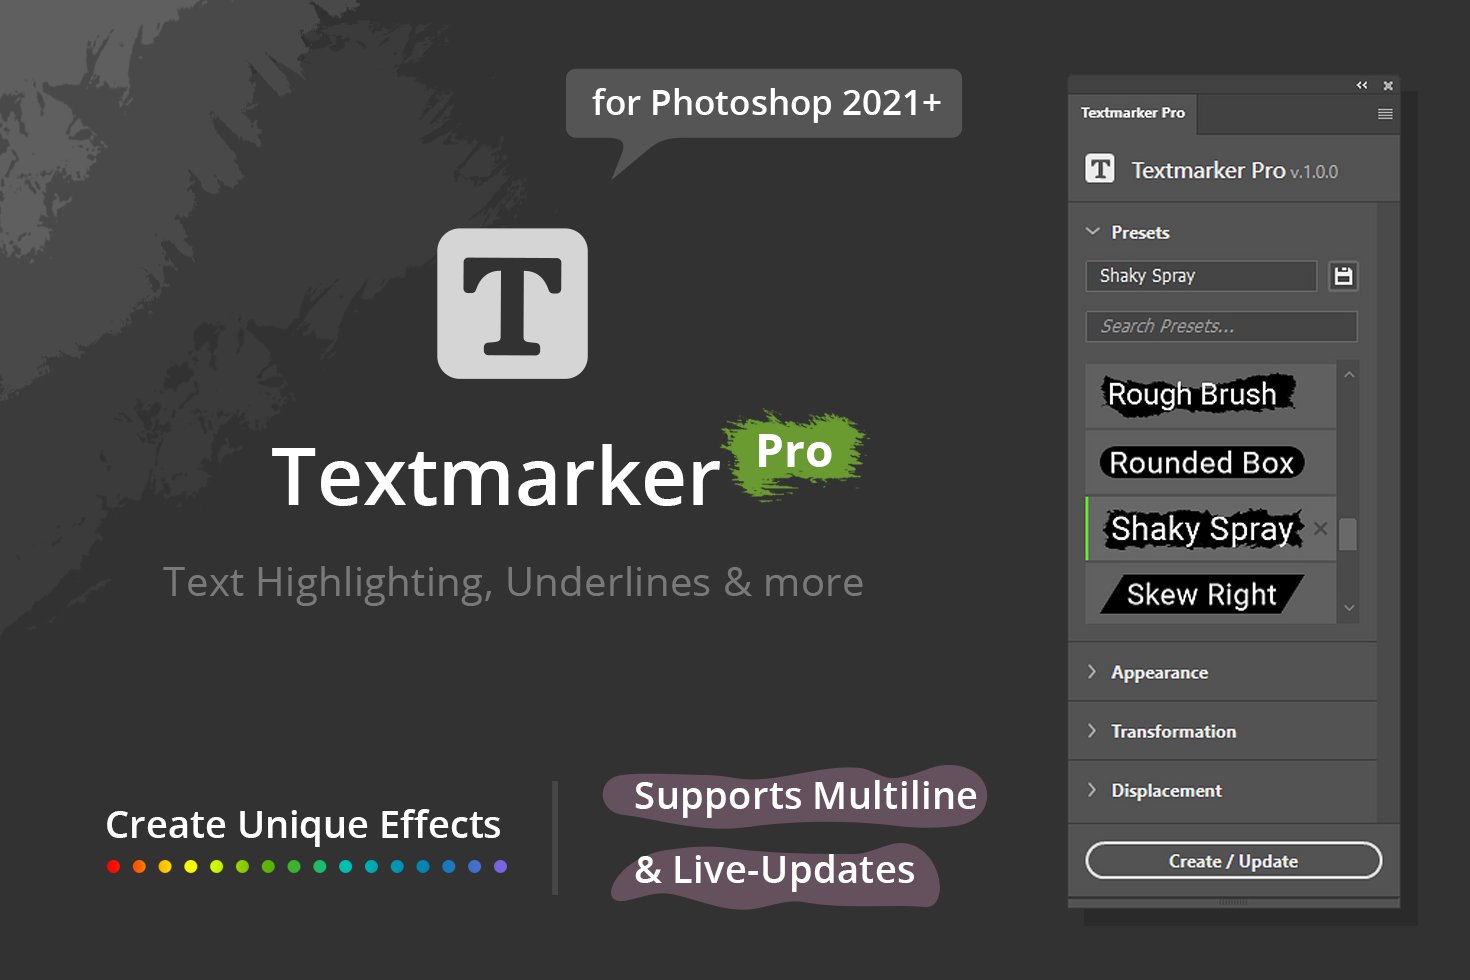 Textmarker Pro for PS 2021+cover image.